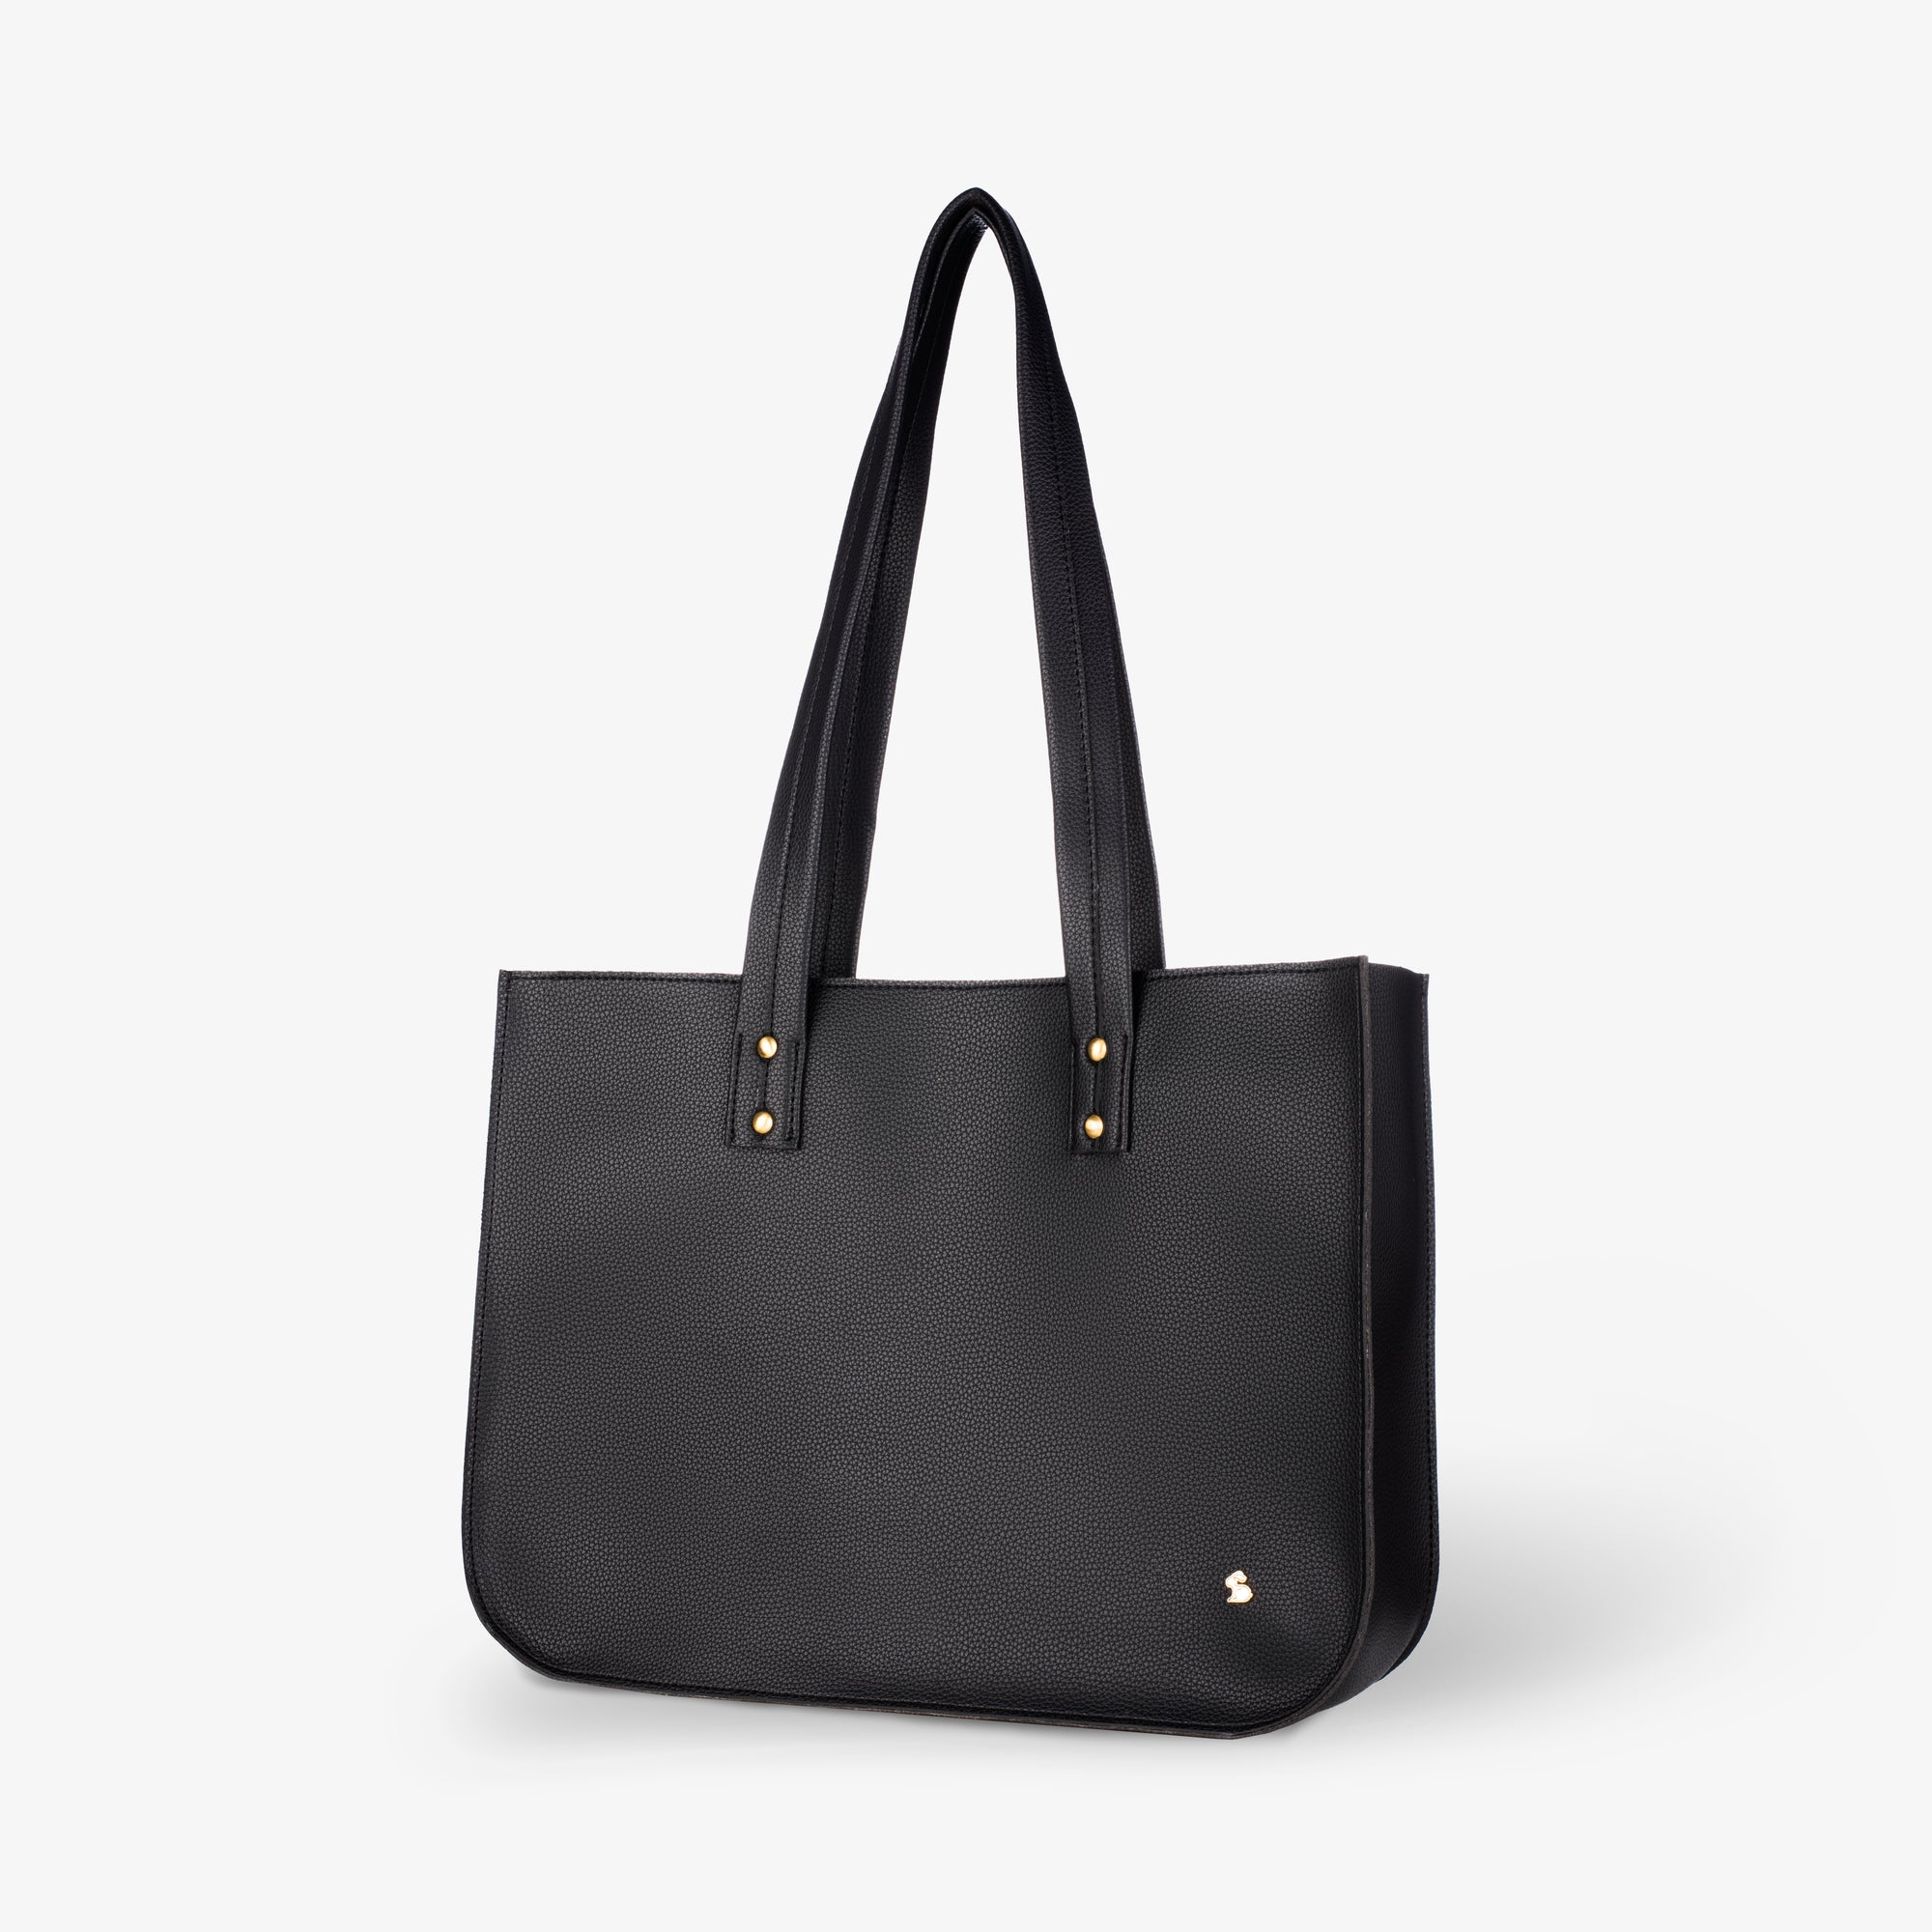 vegan leather tote bag with zipper